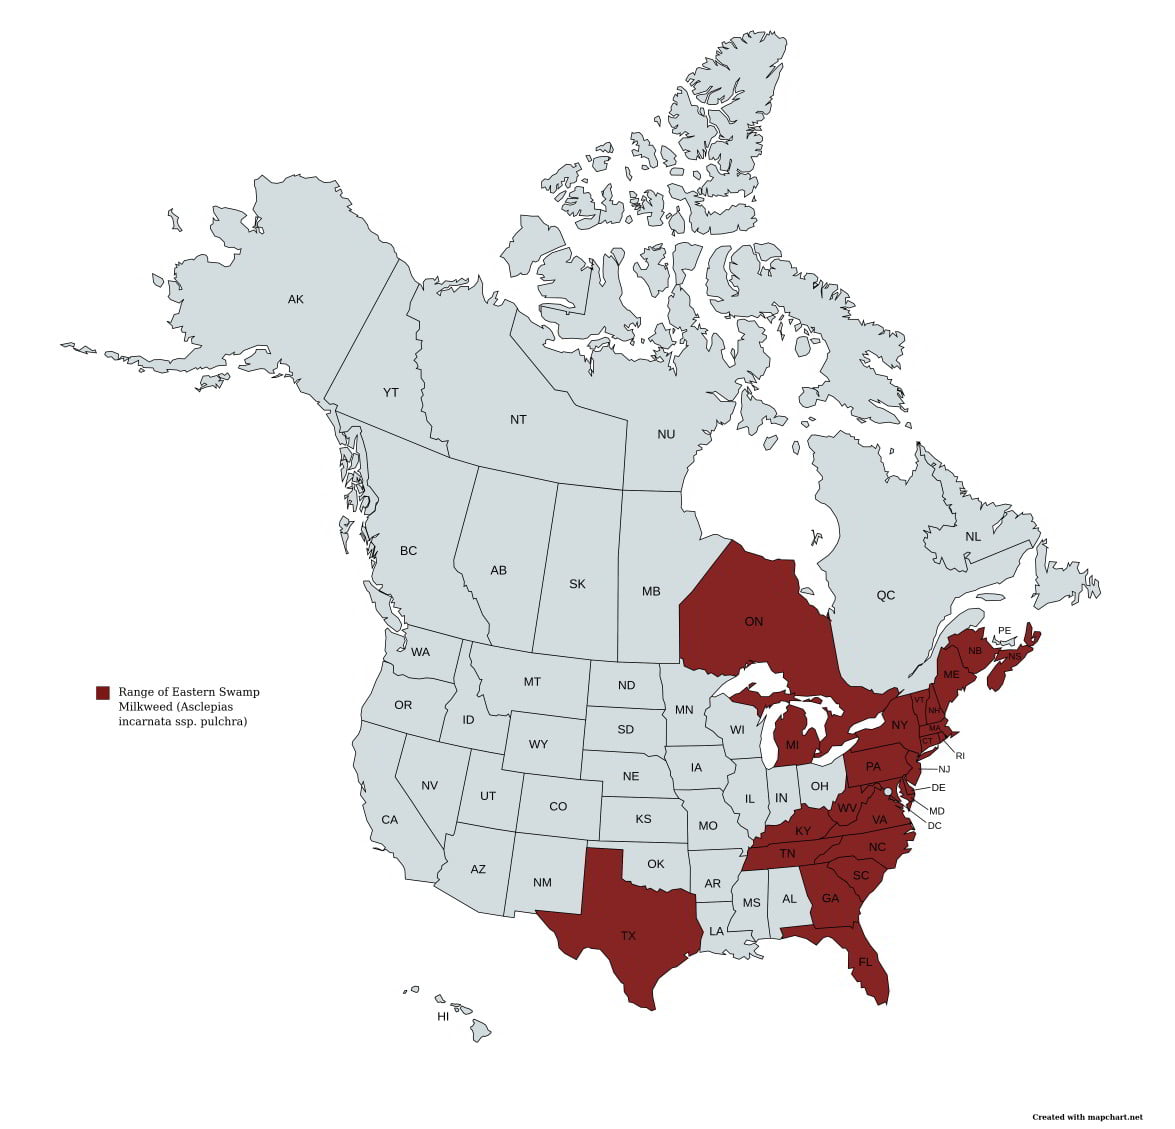 Range of Eastern Swamp Milkweed (Asclepias incarnata ssp. pulchra) in the United States and Canada